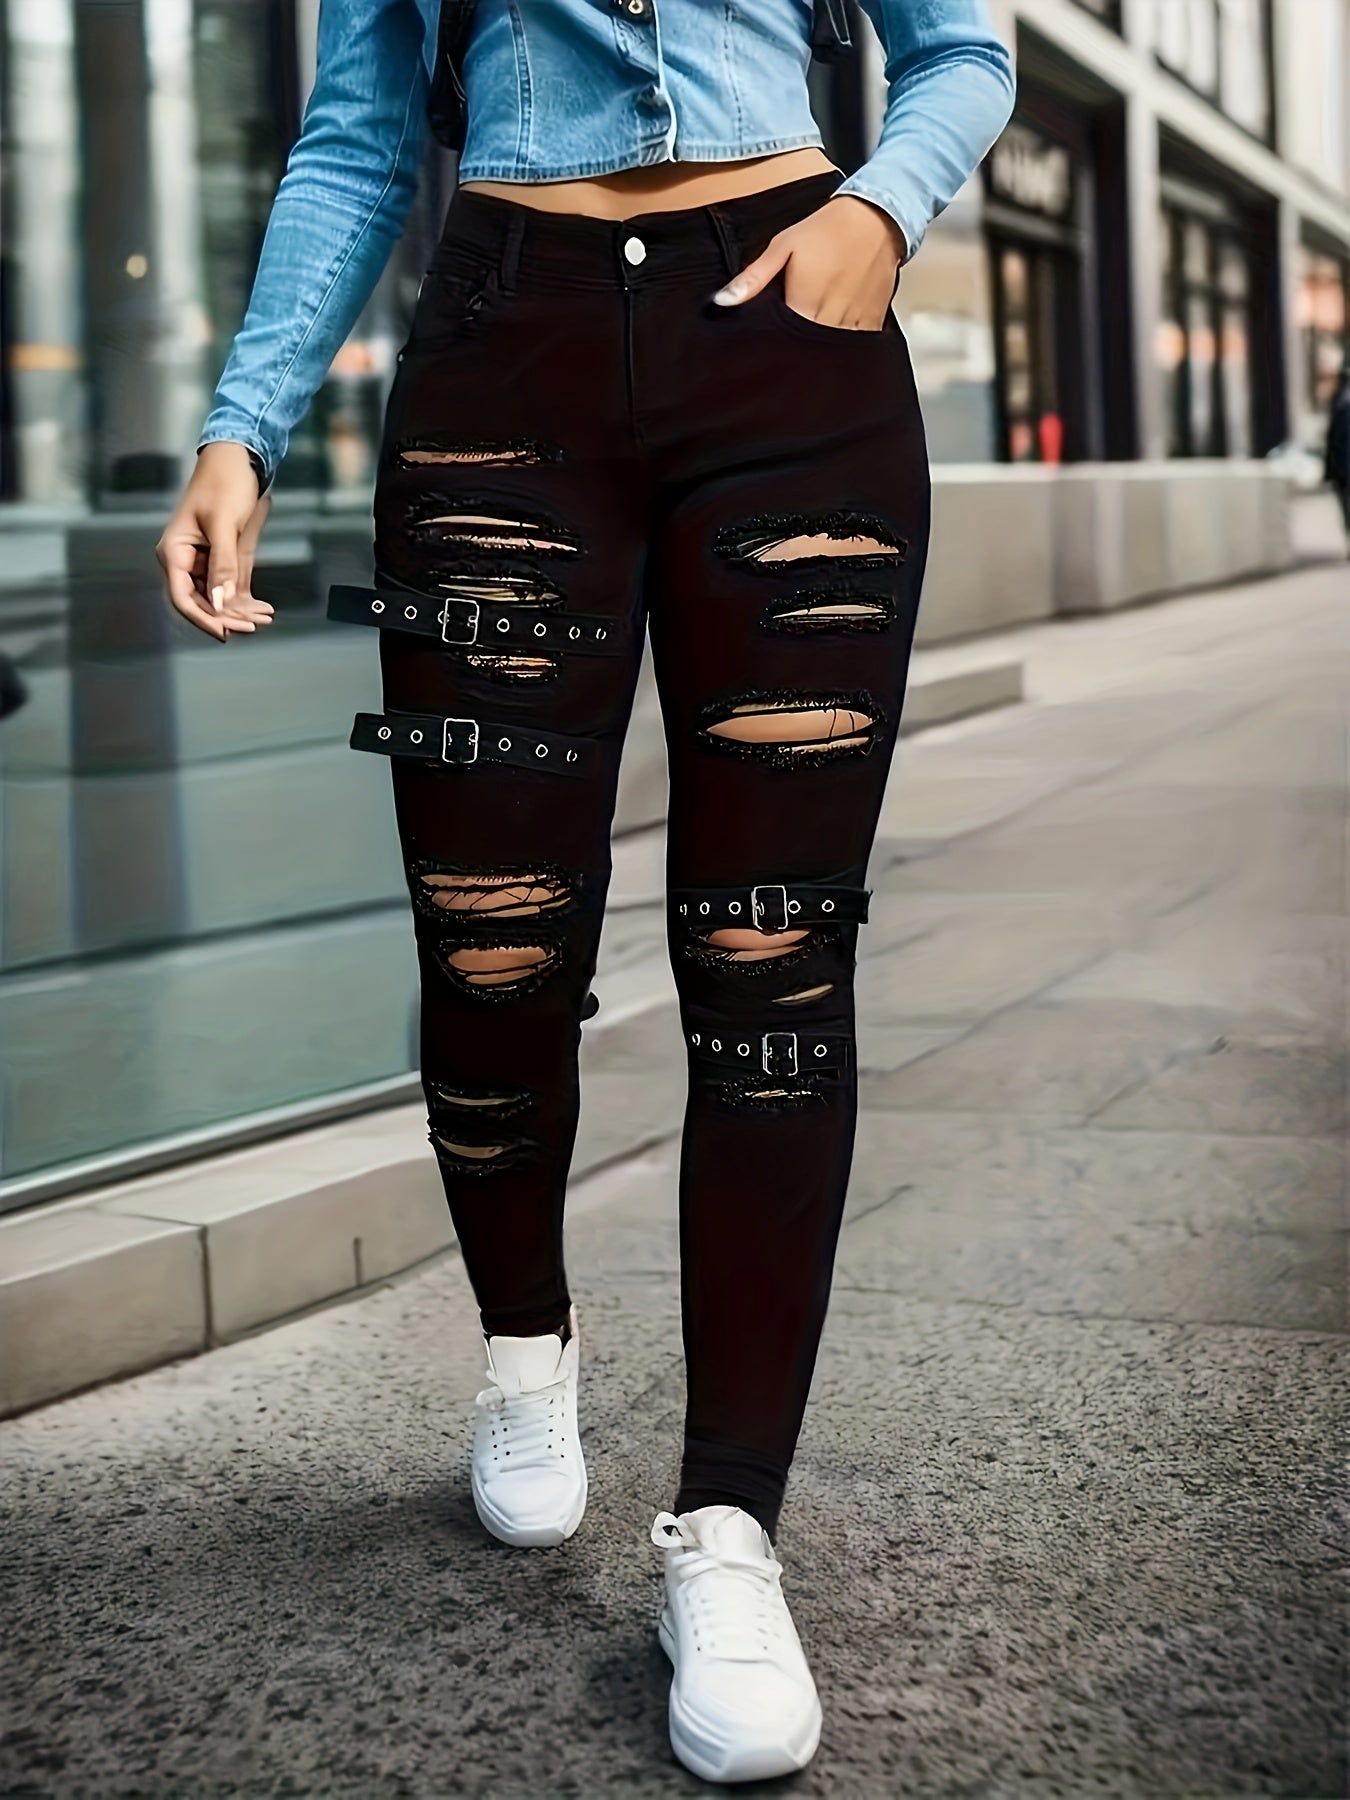 Women's Slim Fit Ripped Holes Chic Skinny Jeans - Stretchy and Tight Denim Pants